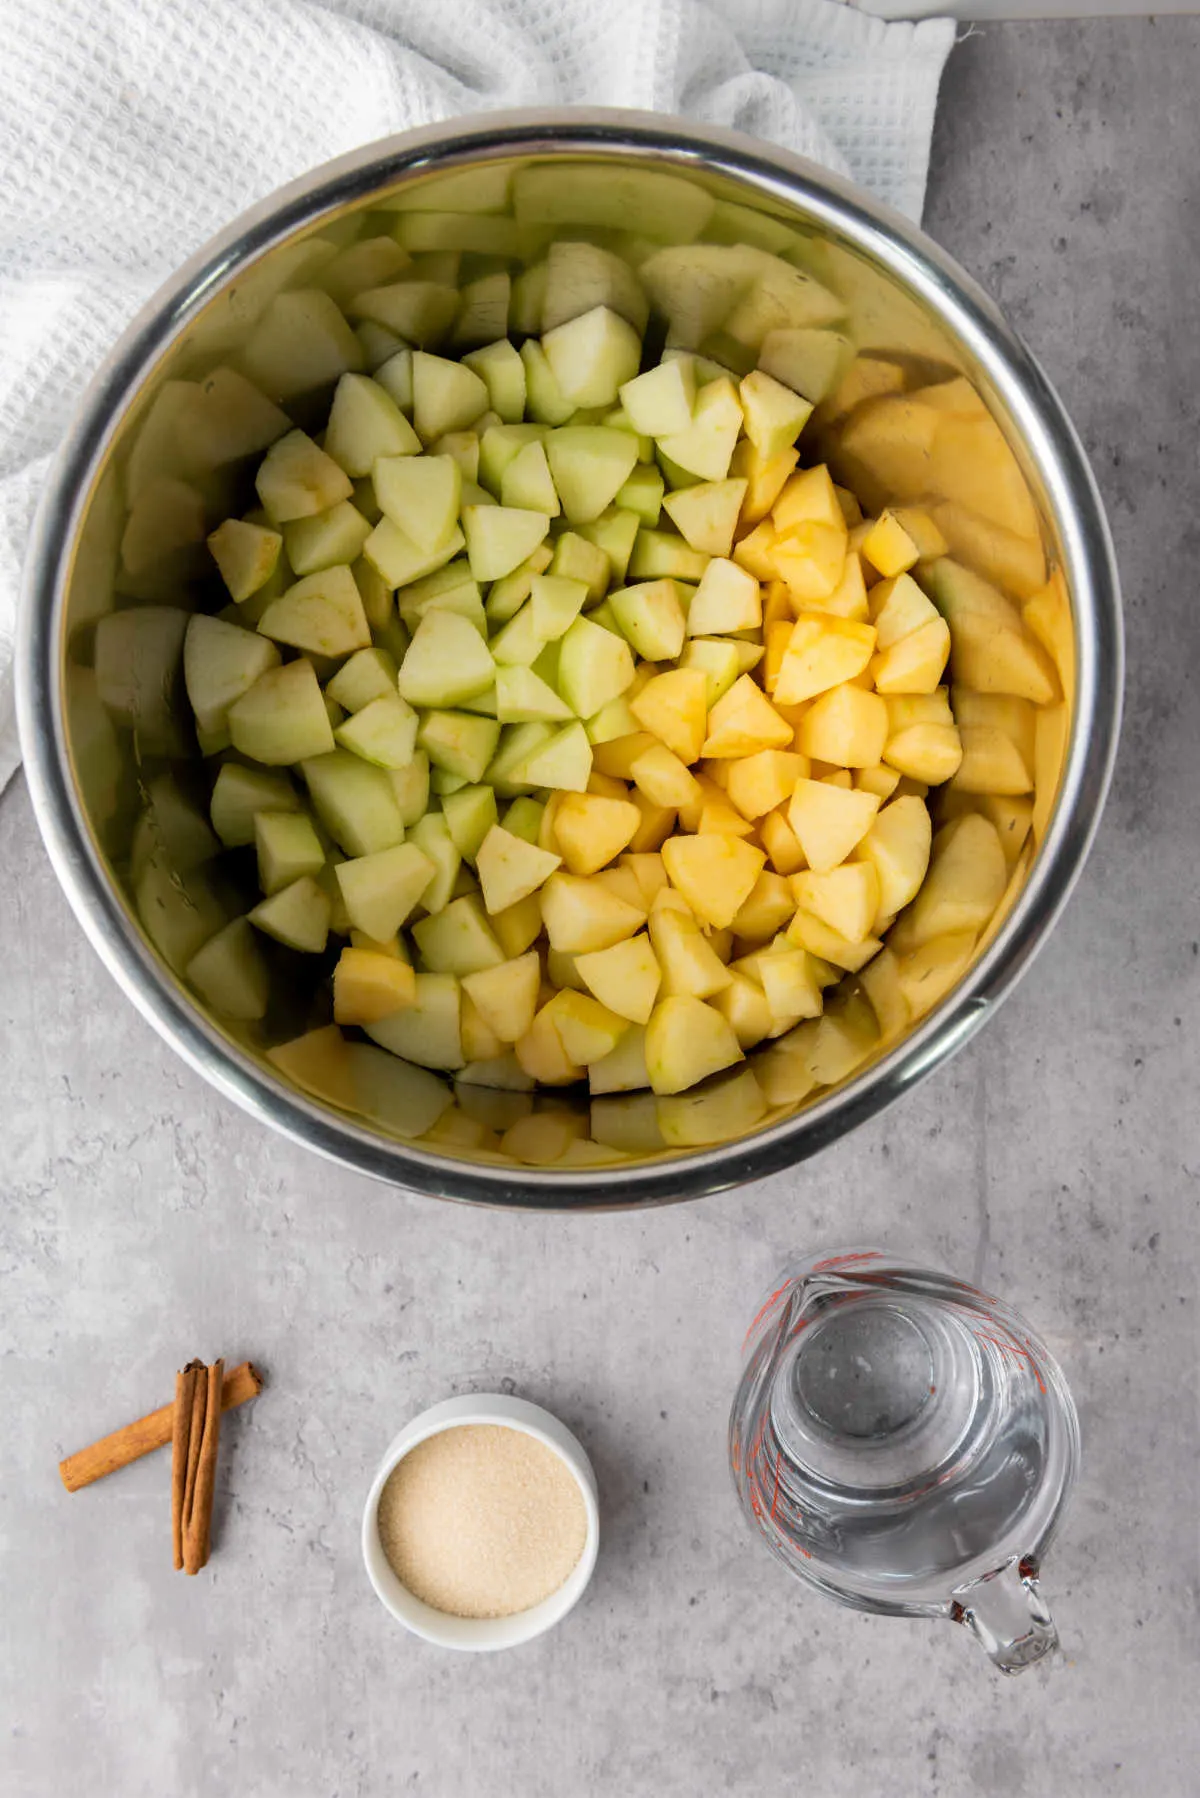 Diced apples in instant pot insert with remaining ingredients nearby.